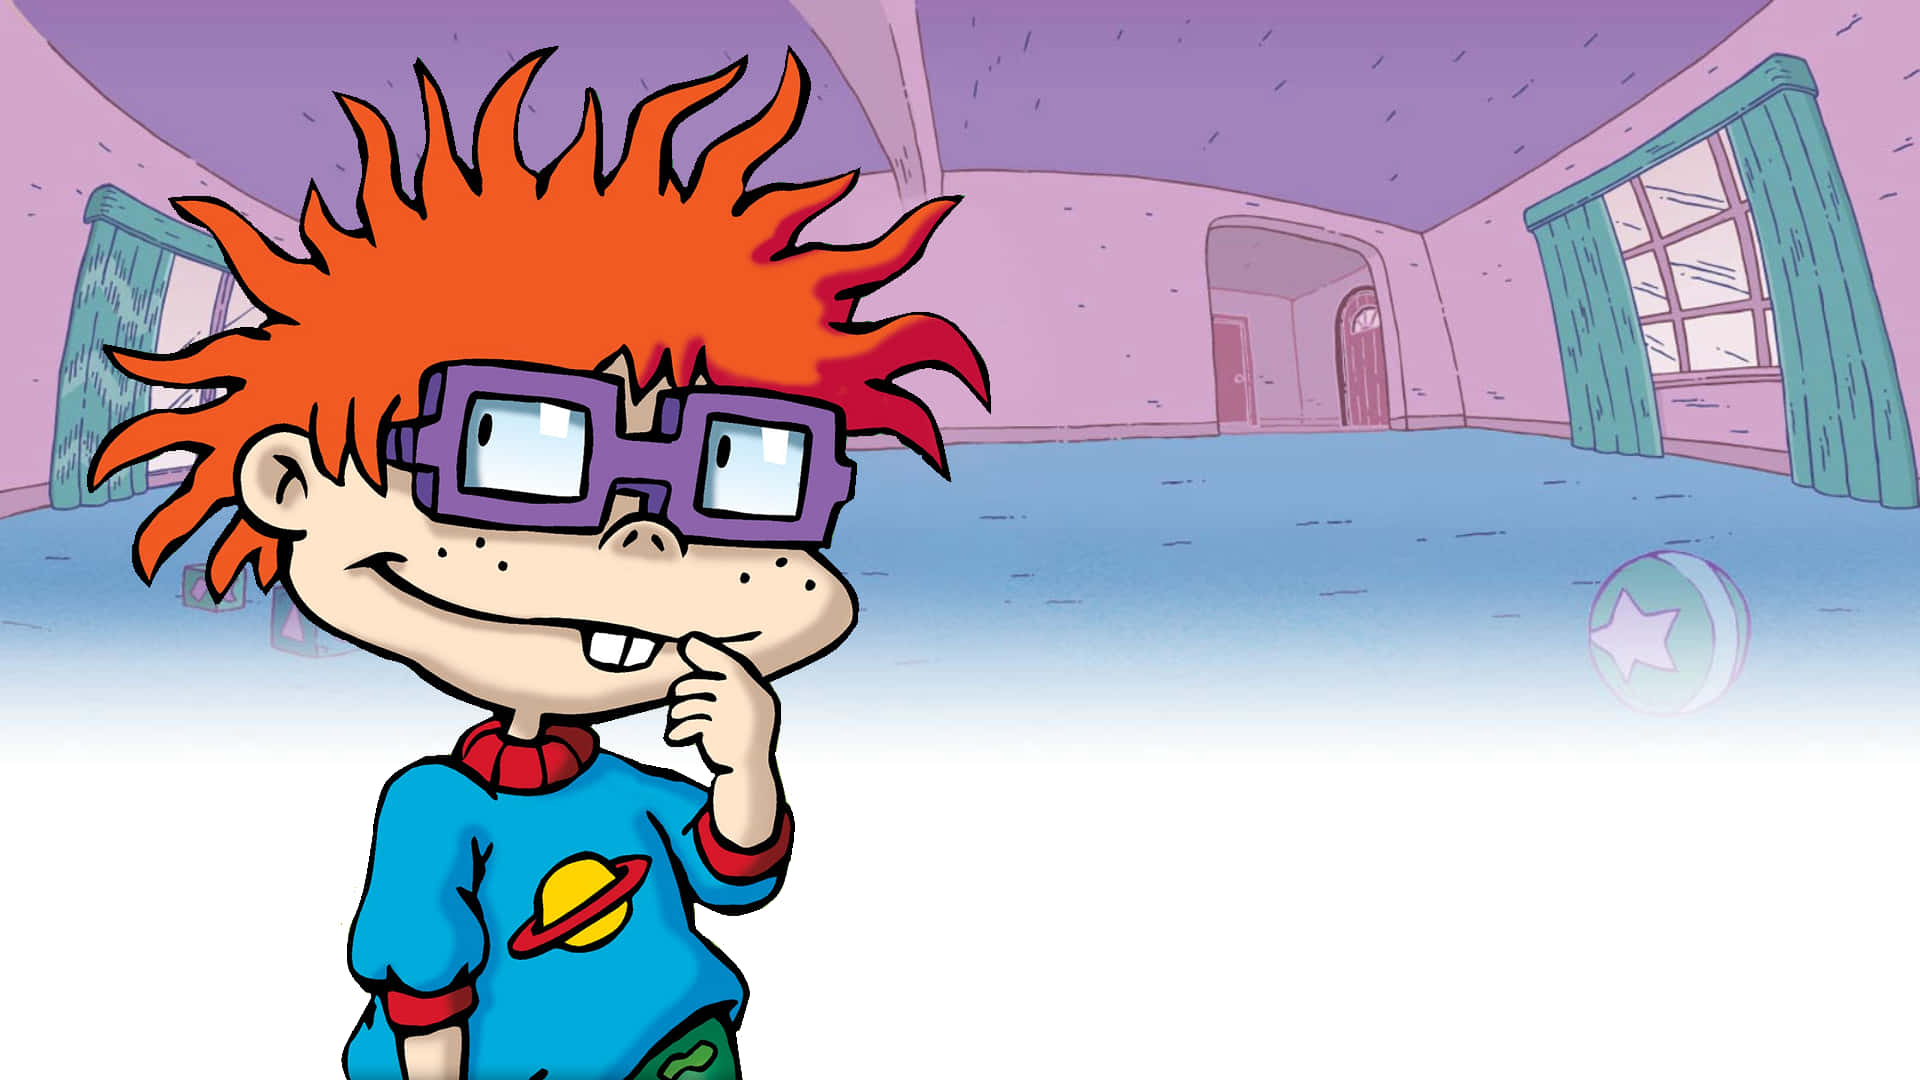 A Cartoon Character With Red Hair And Glasses Standing In A Room Background